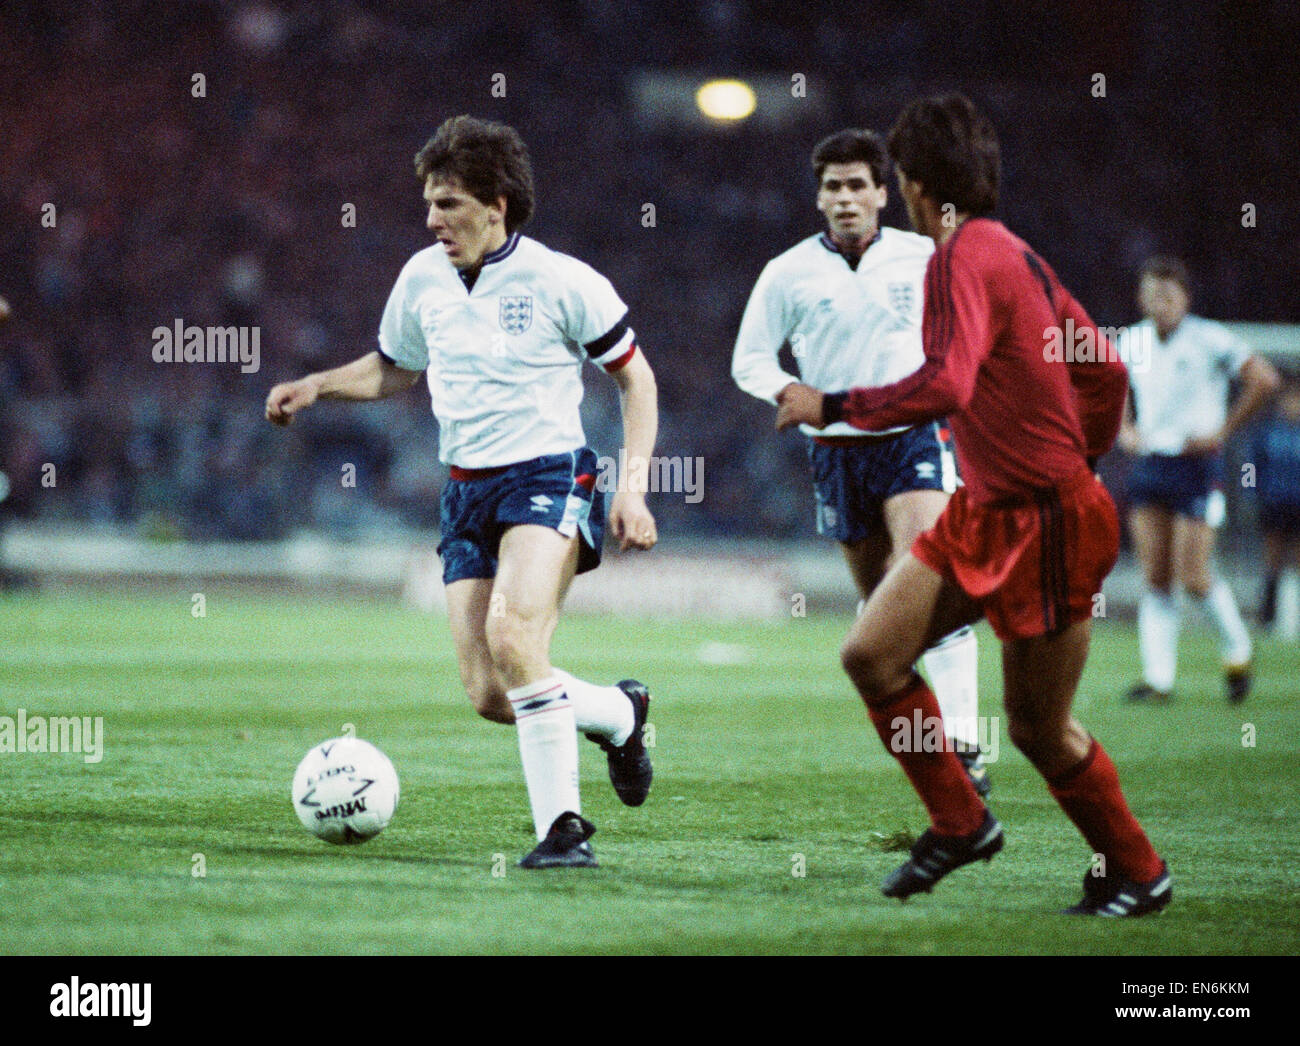 1990 World Cup Qualifier at Wembley Stadium. England 5 v Albania 0. England's Peter Beardsley on the ball faced by an Albanian defender as Neil Webb looks on. 26th April 1989. Stock Photo